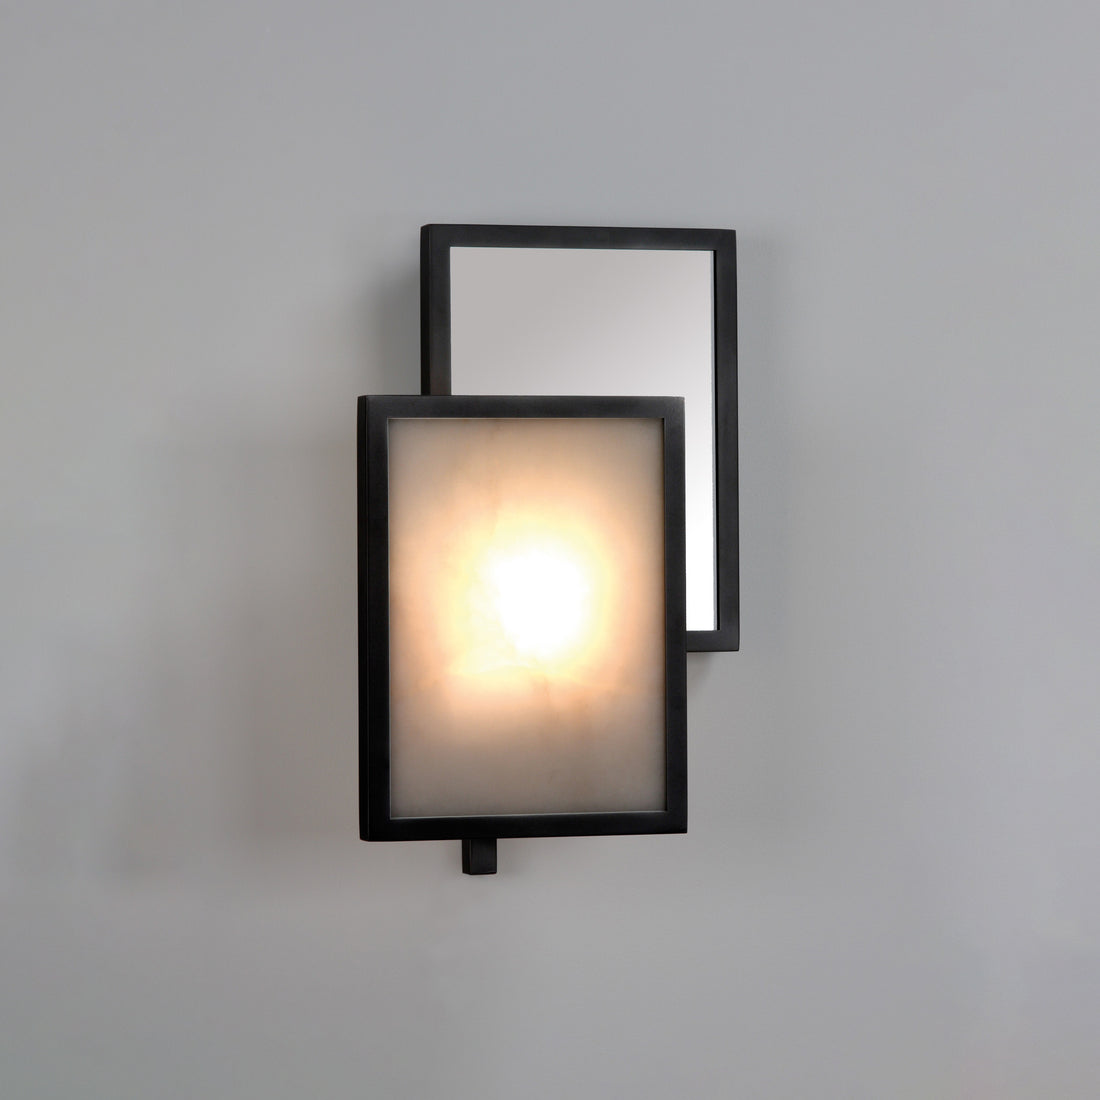 Carapace Wall Light - 2 elements